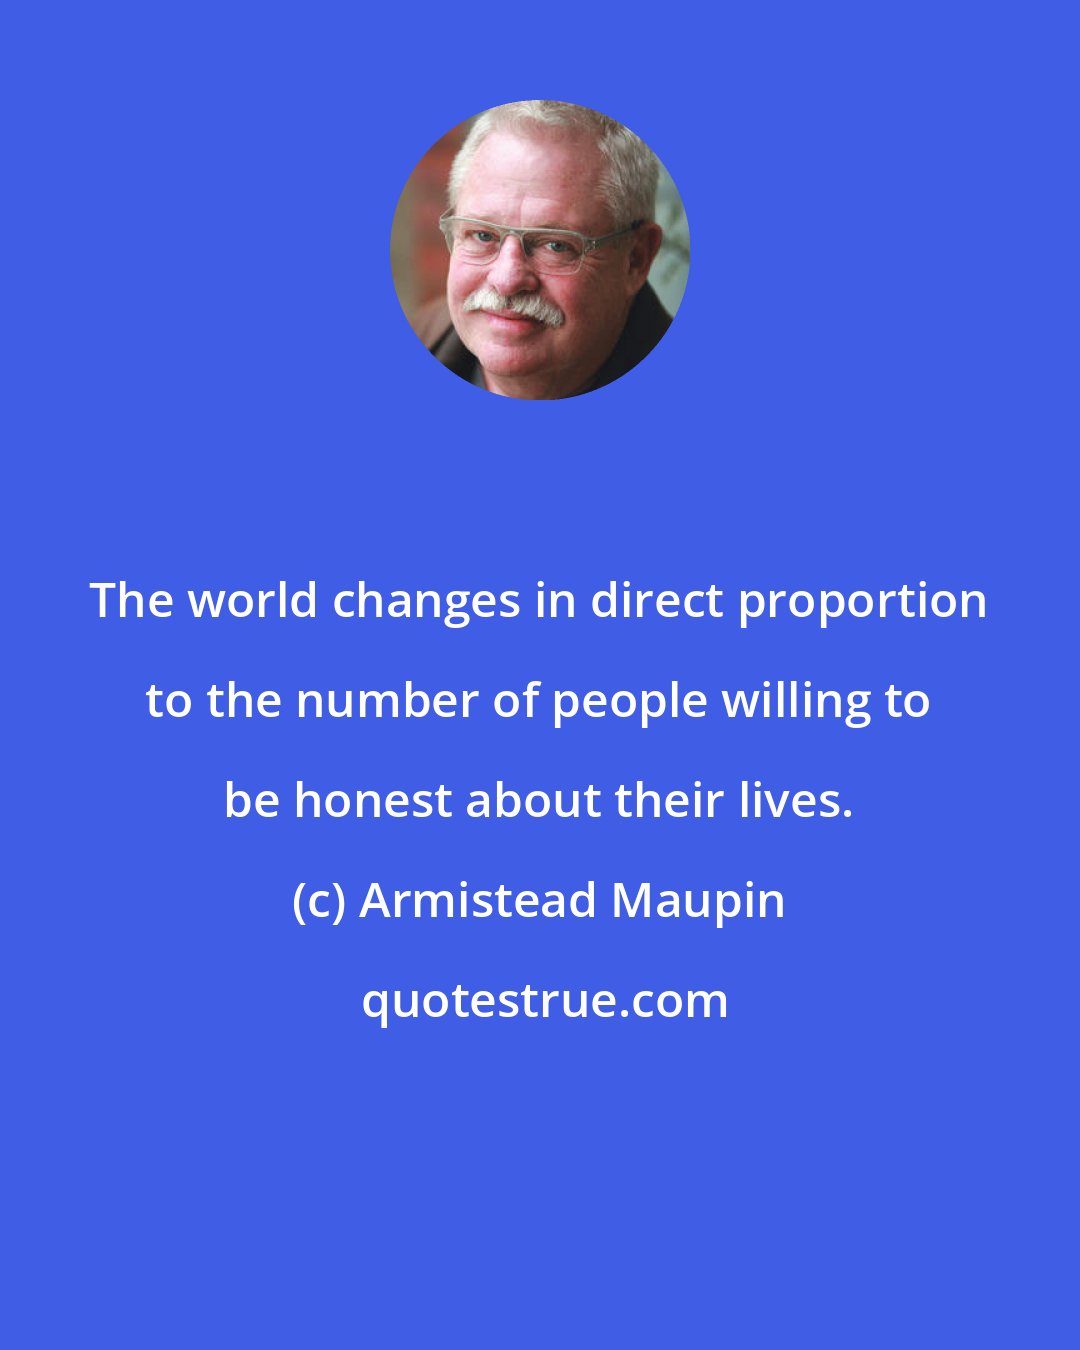 Armistead Maupin: The world changes in direct proportion to the number of people willing to be honest about their lives.